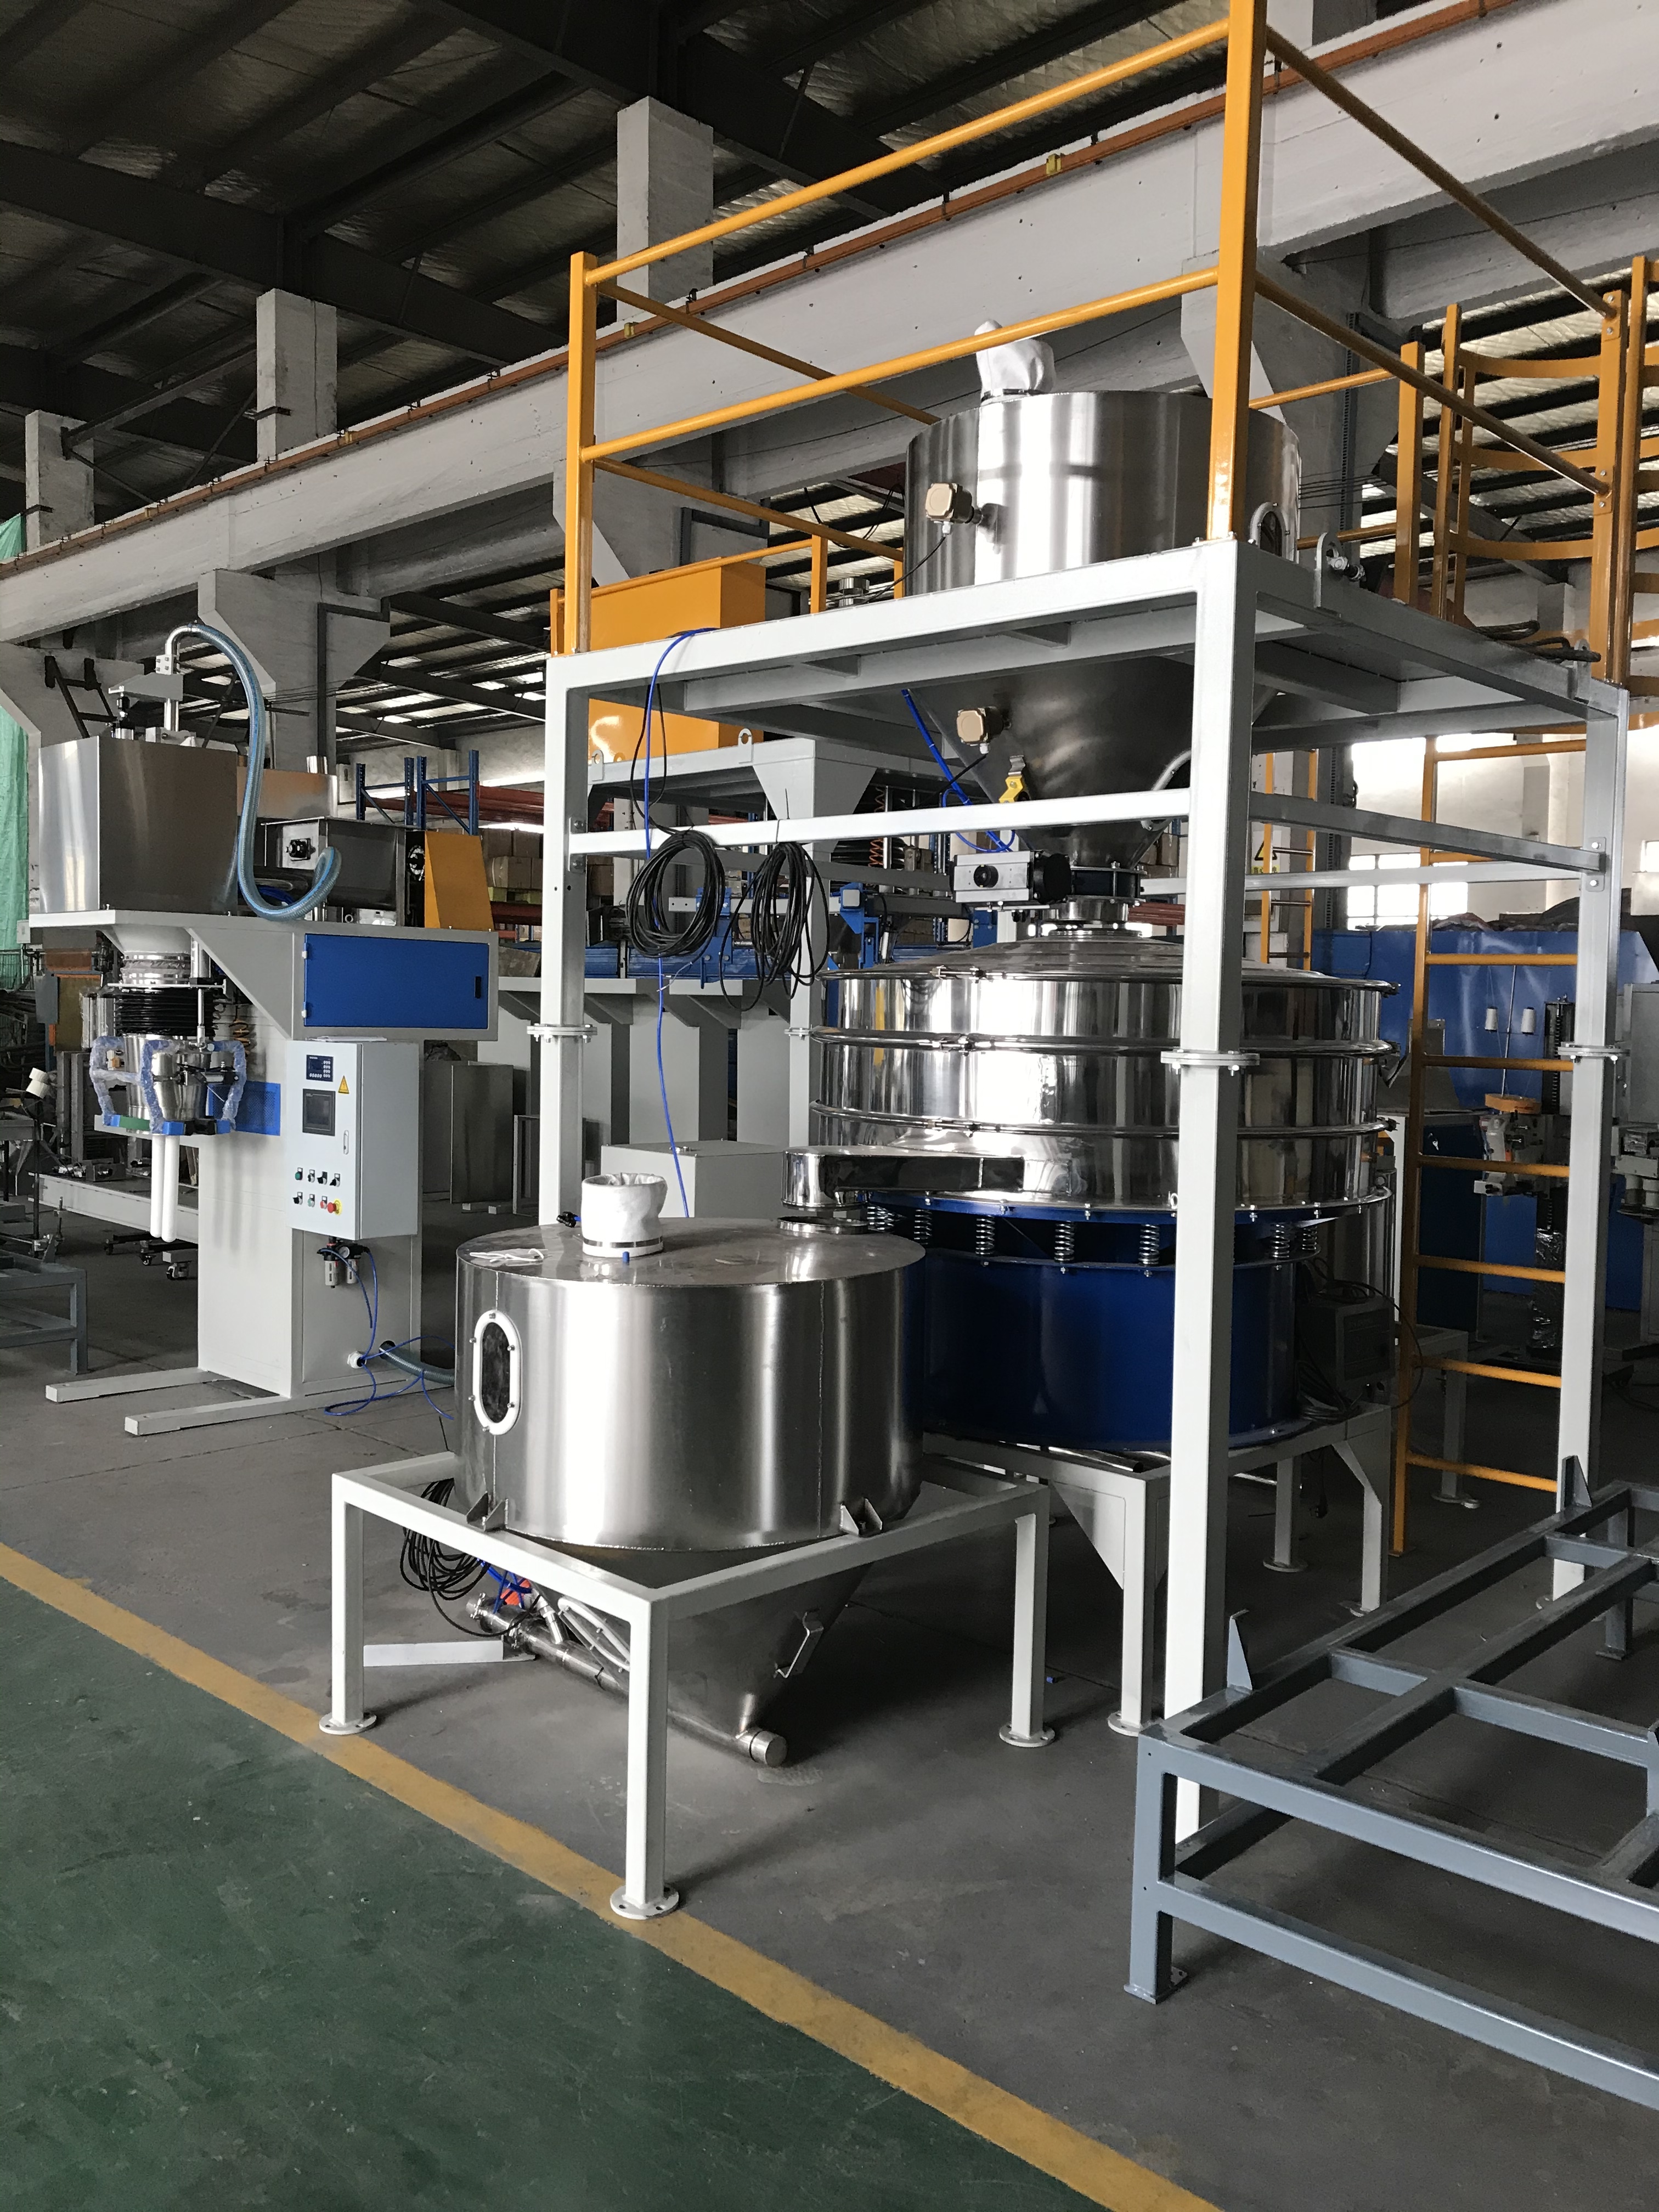 full automatic Millet packaging machine 无锡航一机械有限公司WUXI HY MACHINERY CO., LTD full automatic bagging palletizing and wrapping system Fully Automatic Packing System Palletizing Line